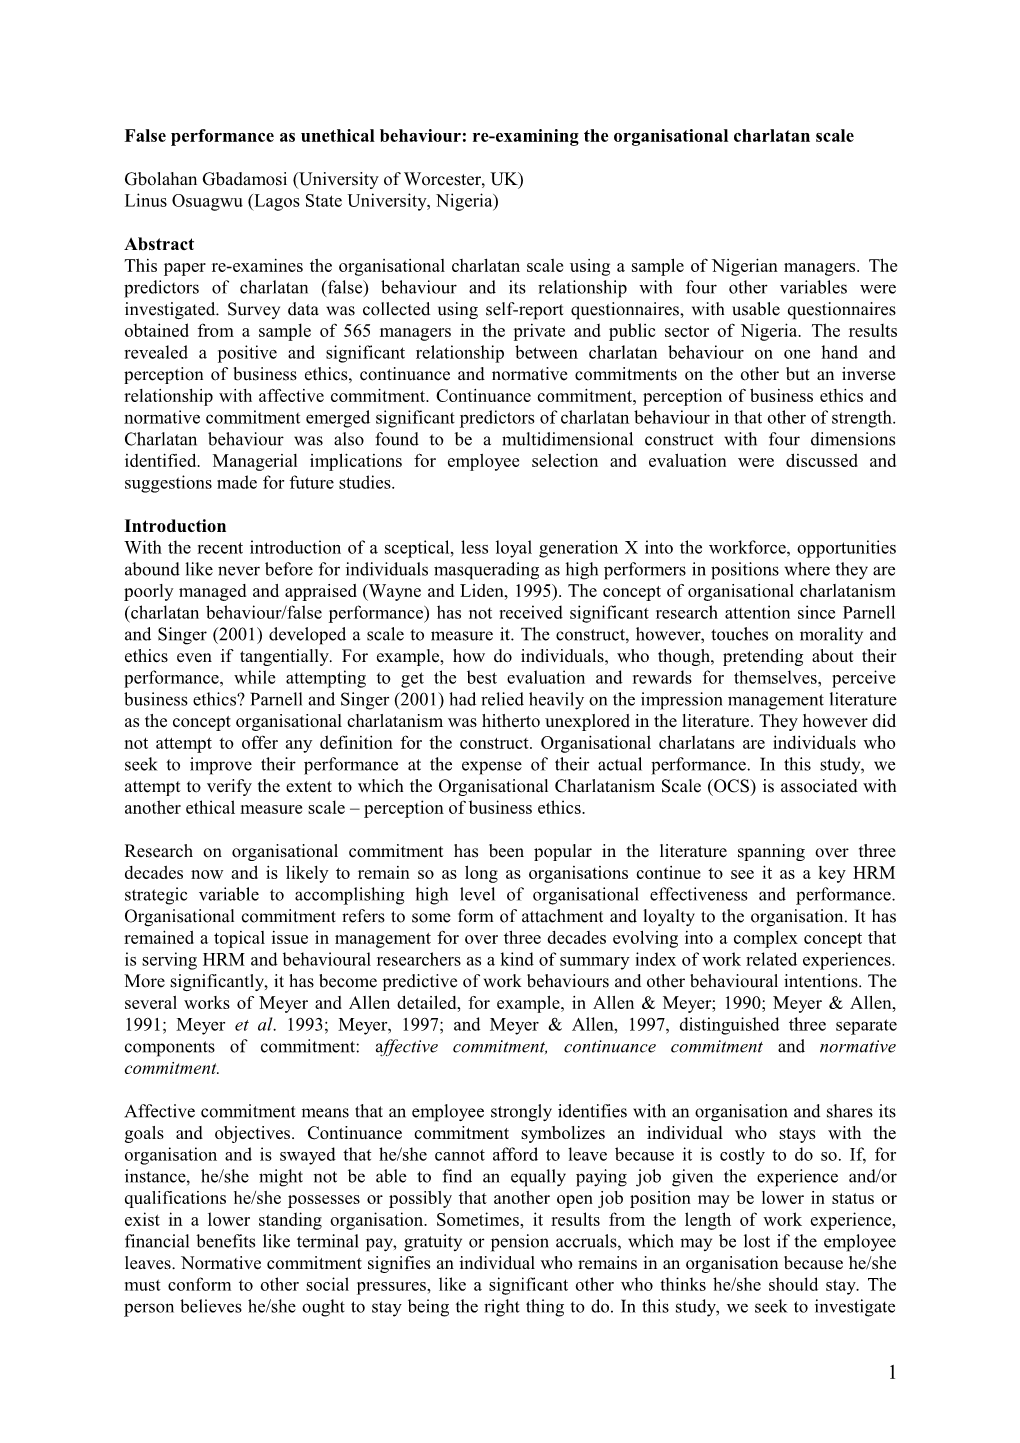 IAABD 2007 London Conference Paper